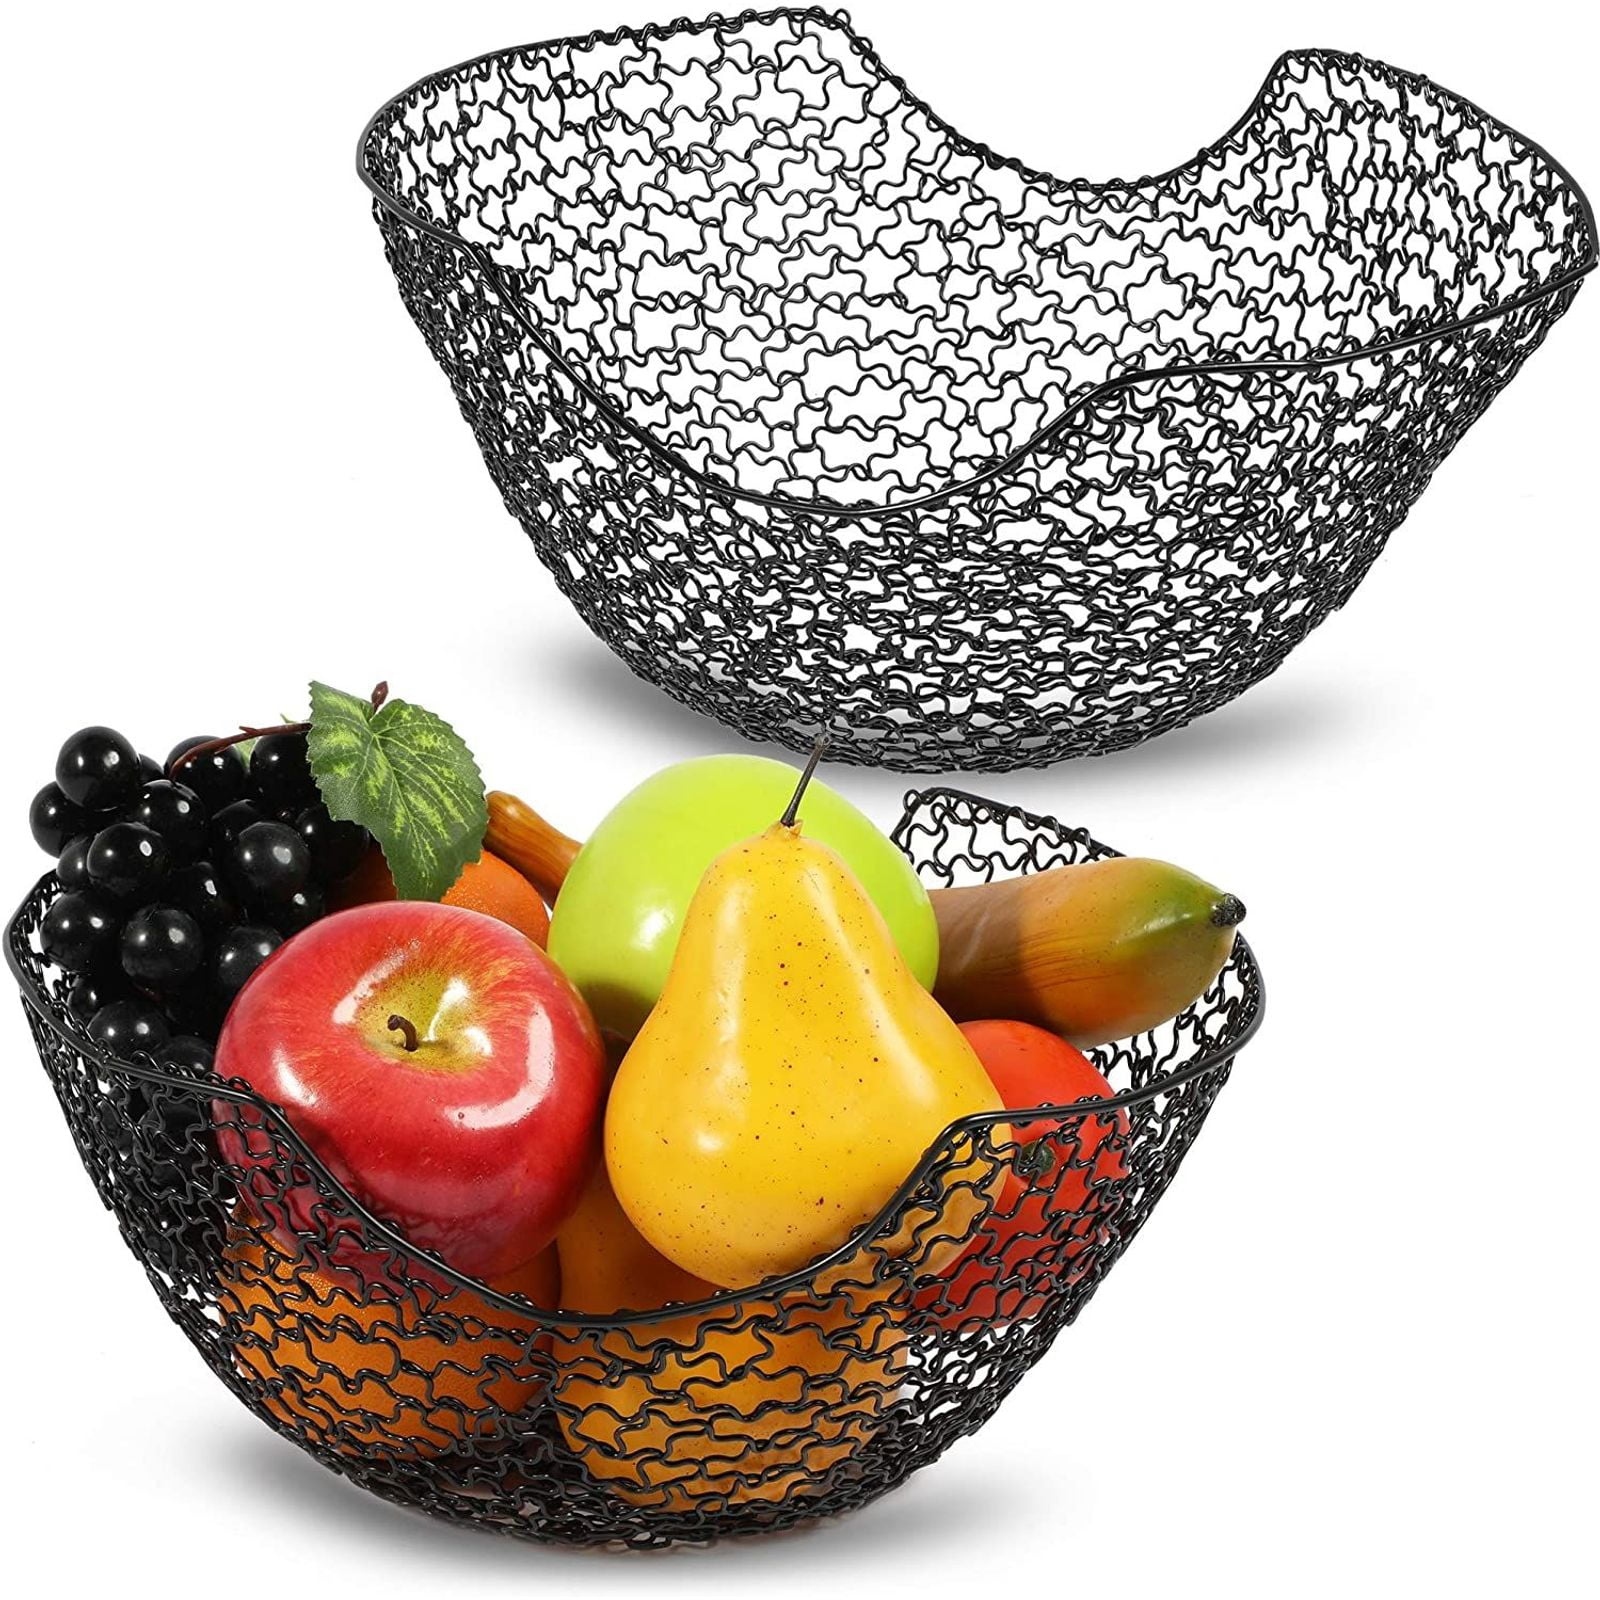 Black, gold and green Sue Supply Kitchen Simple Fruit Basket-style Living Room Fruit Bowl Home Iron Weave Snack Plate Novel Storage Basket